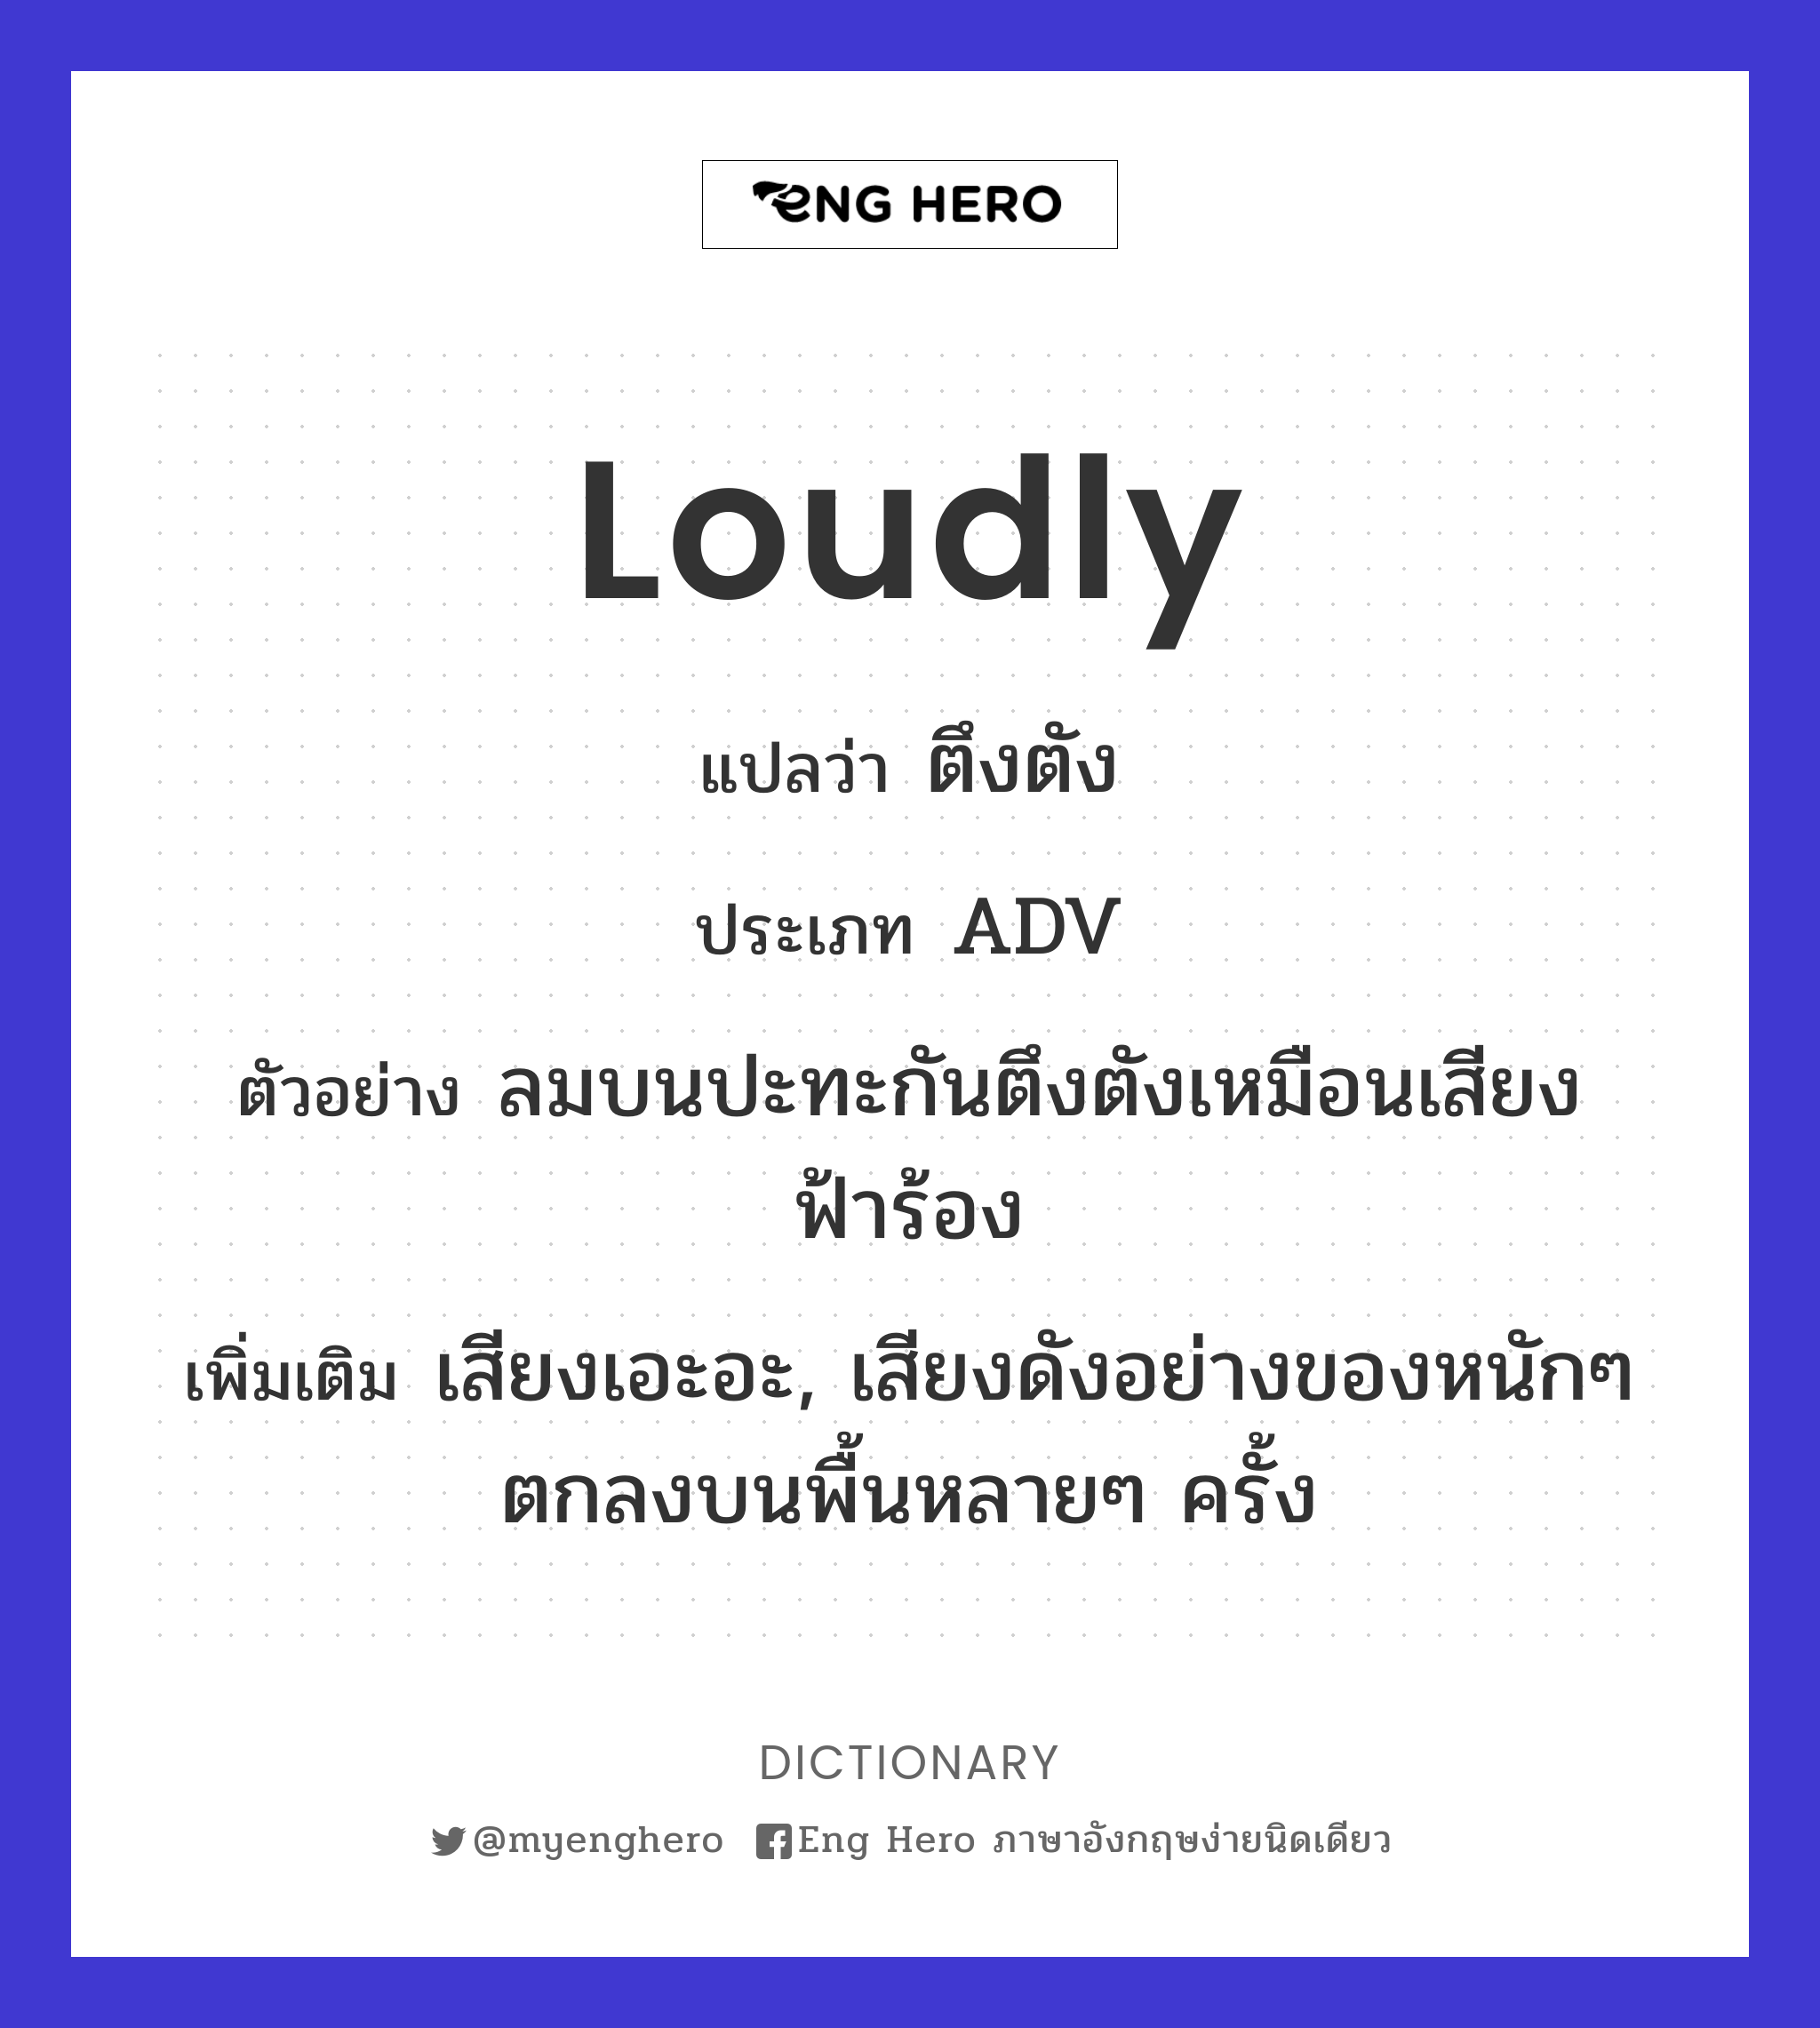 loudly